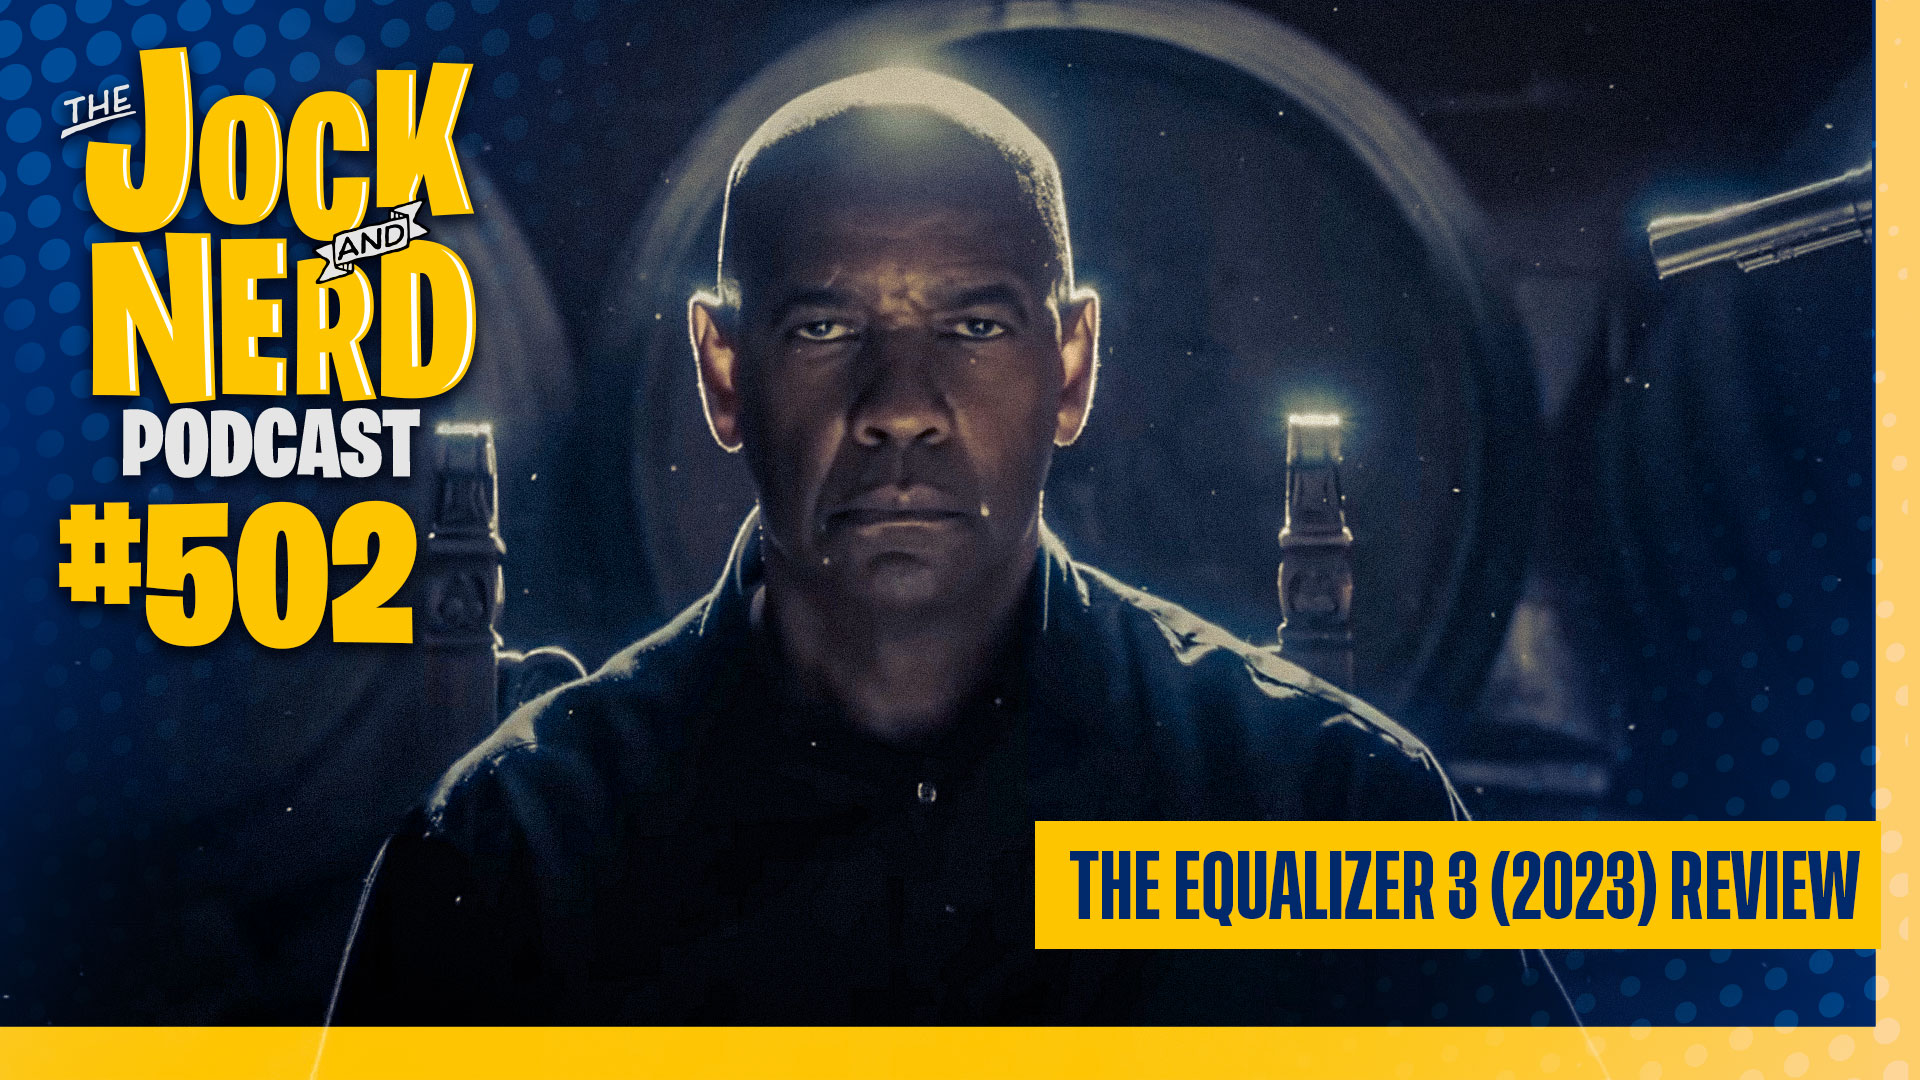 The Equalizer 3 (2023) Review - Aquaman and The Lost Kingdom Trailer